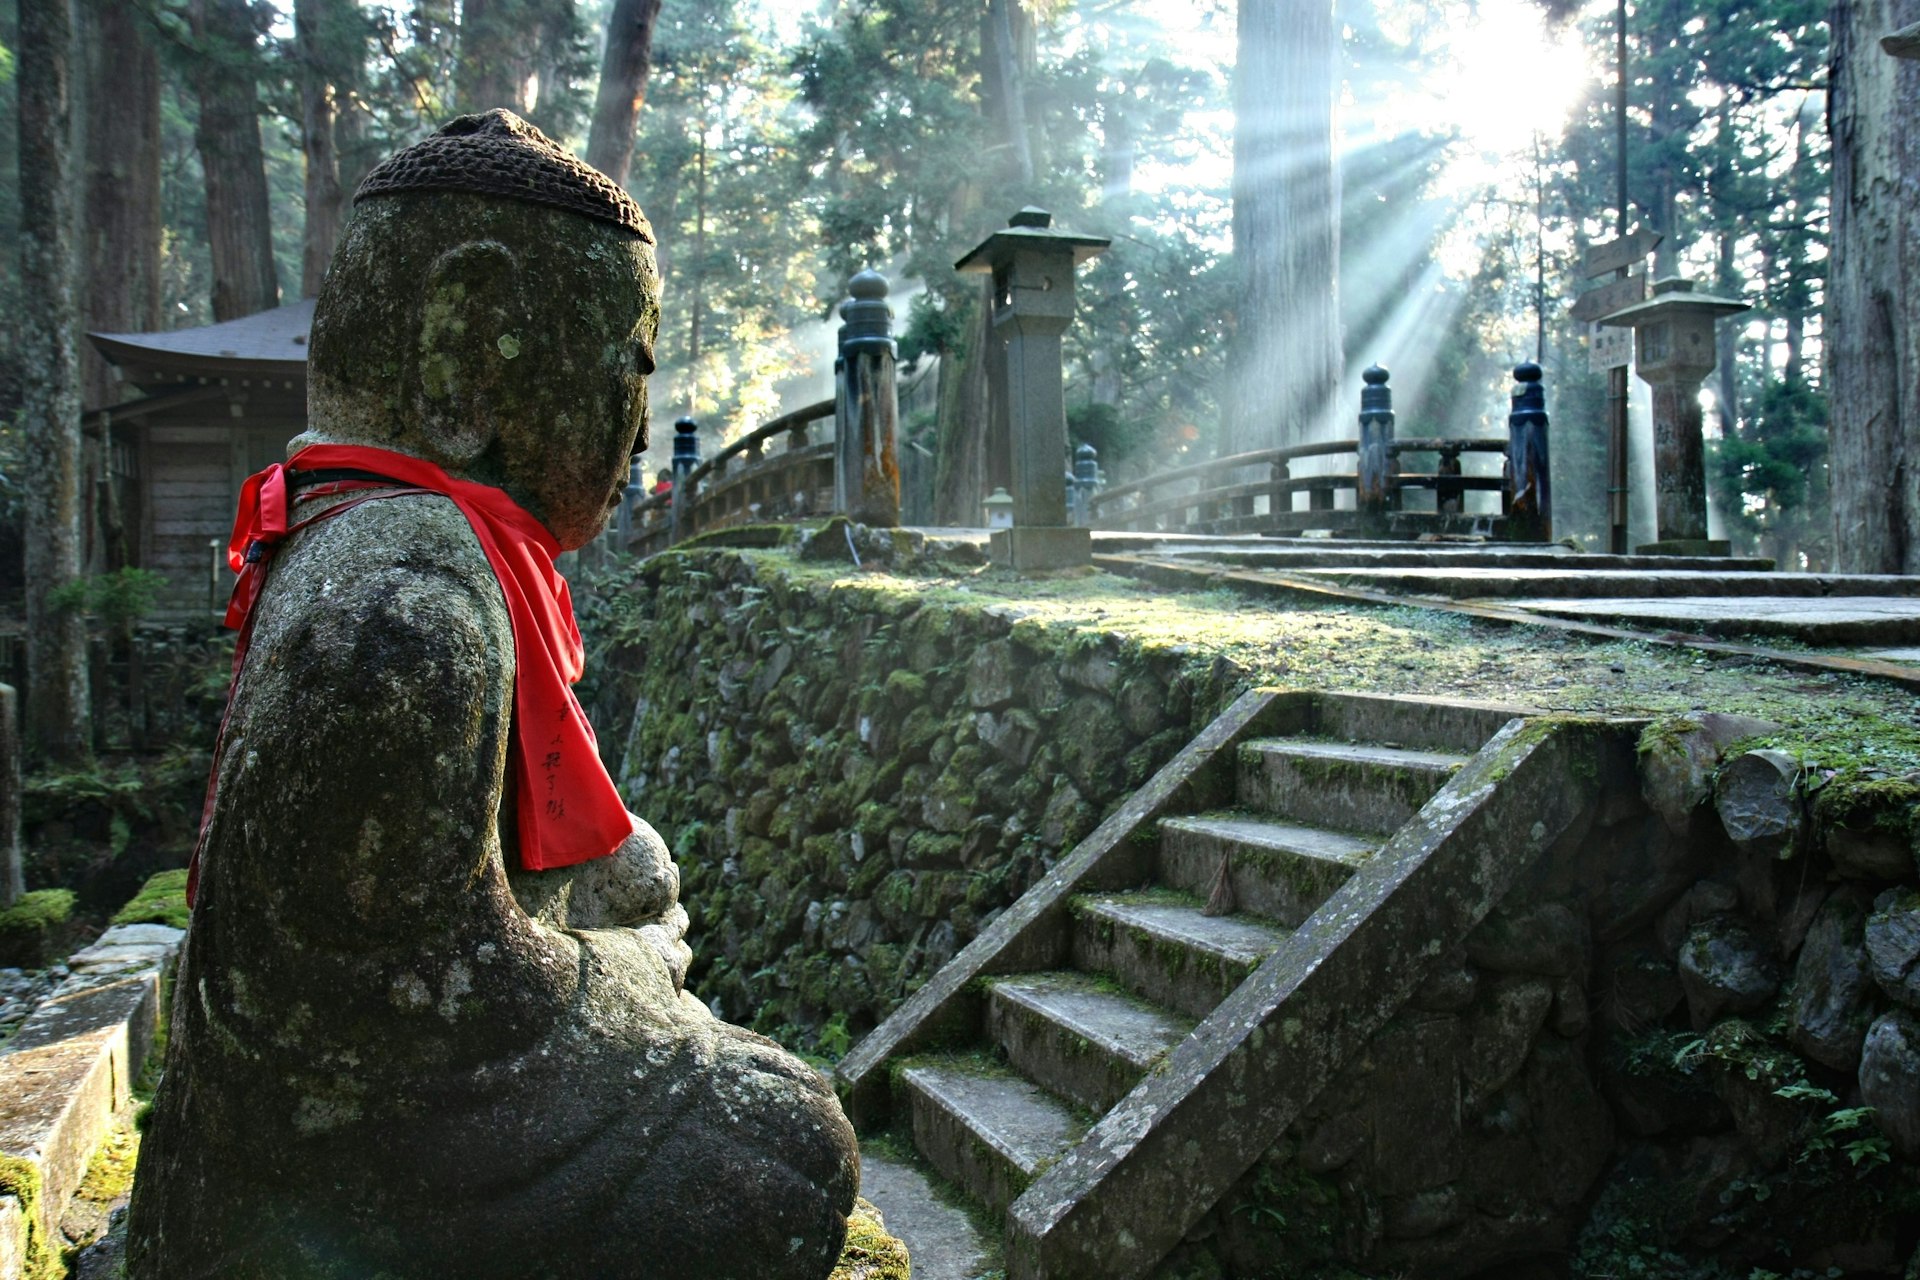 A stone Buddha with a red ribbon around its neck. It is set in forest with beams of sunlight shining between the trees.